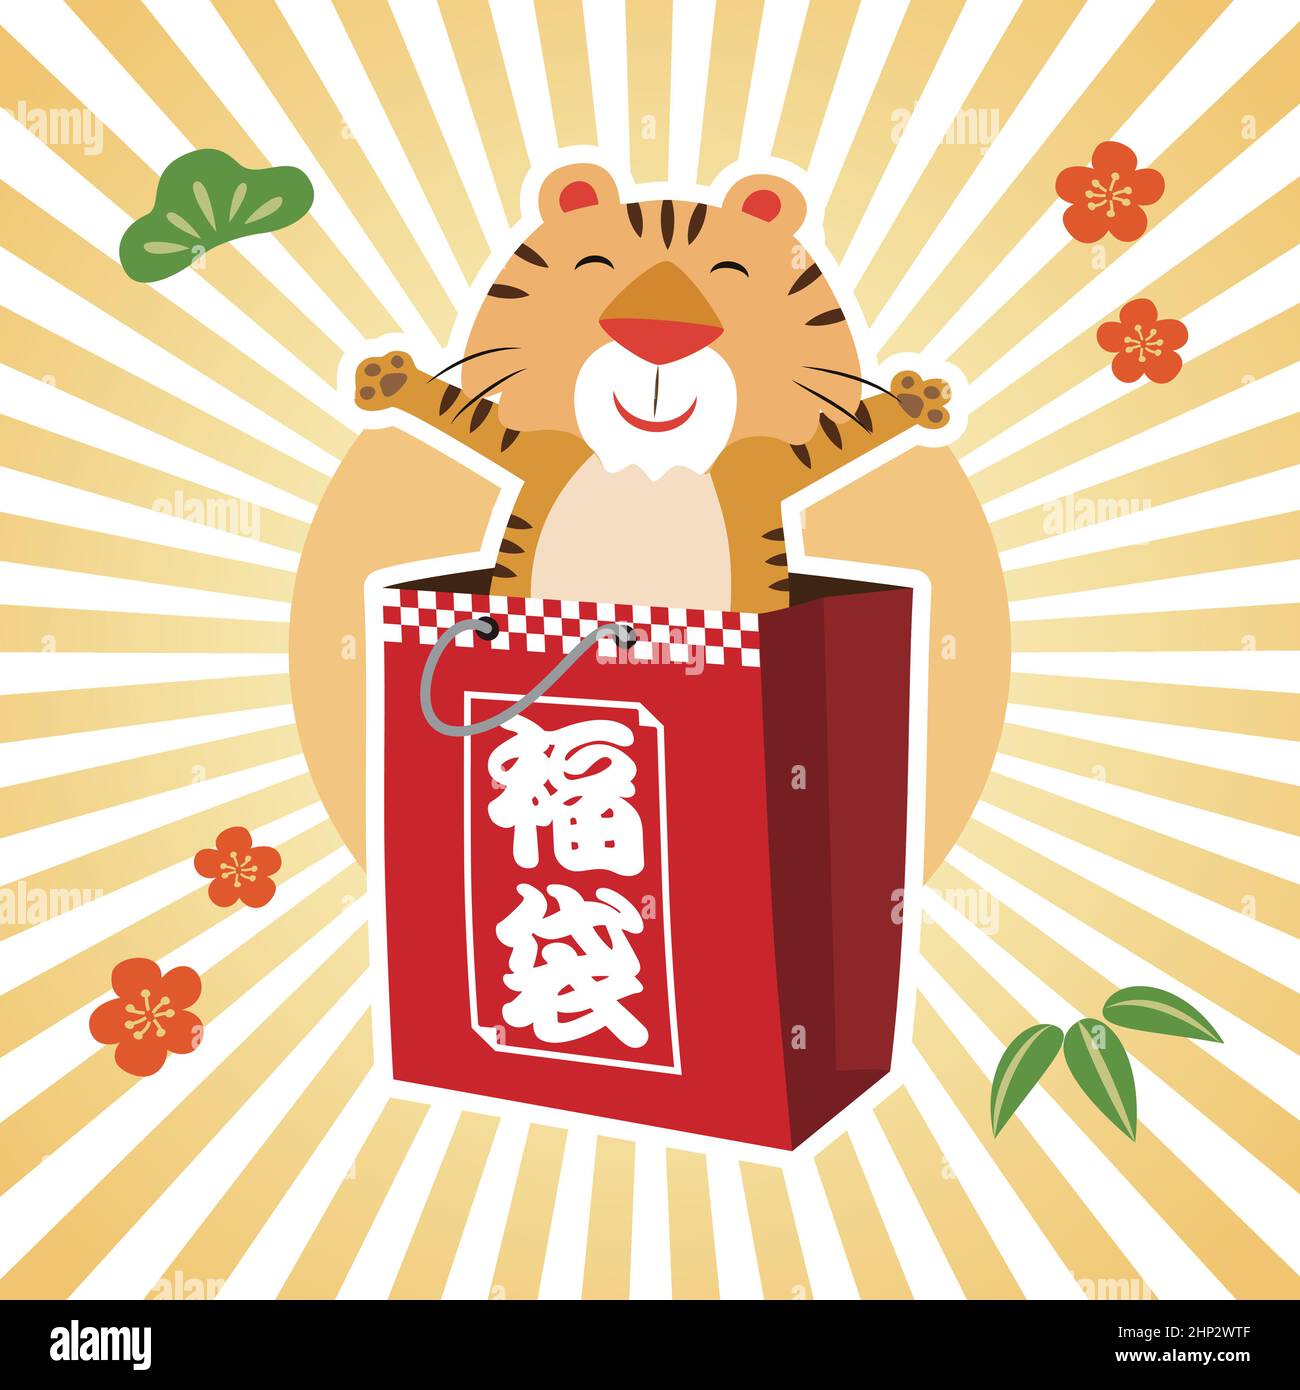 Smiling tiger jumping out of a lucky bag, New Year's card element Stock Vector